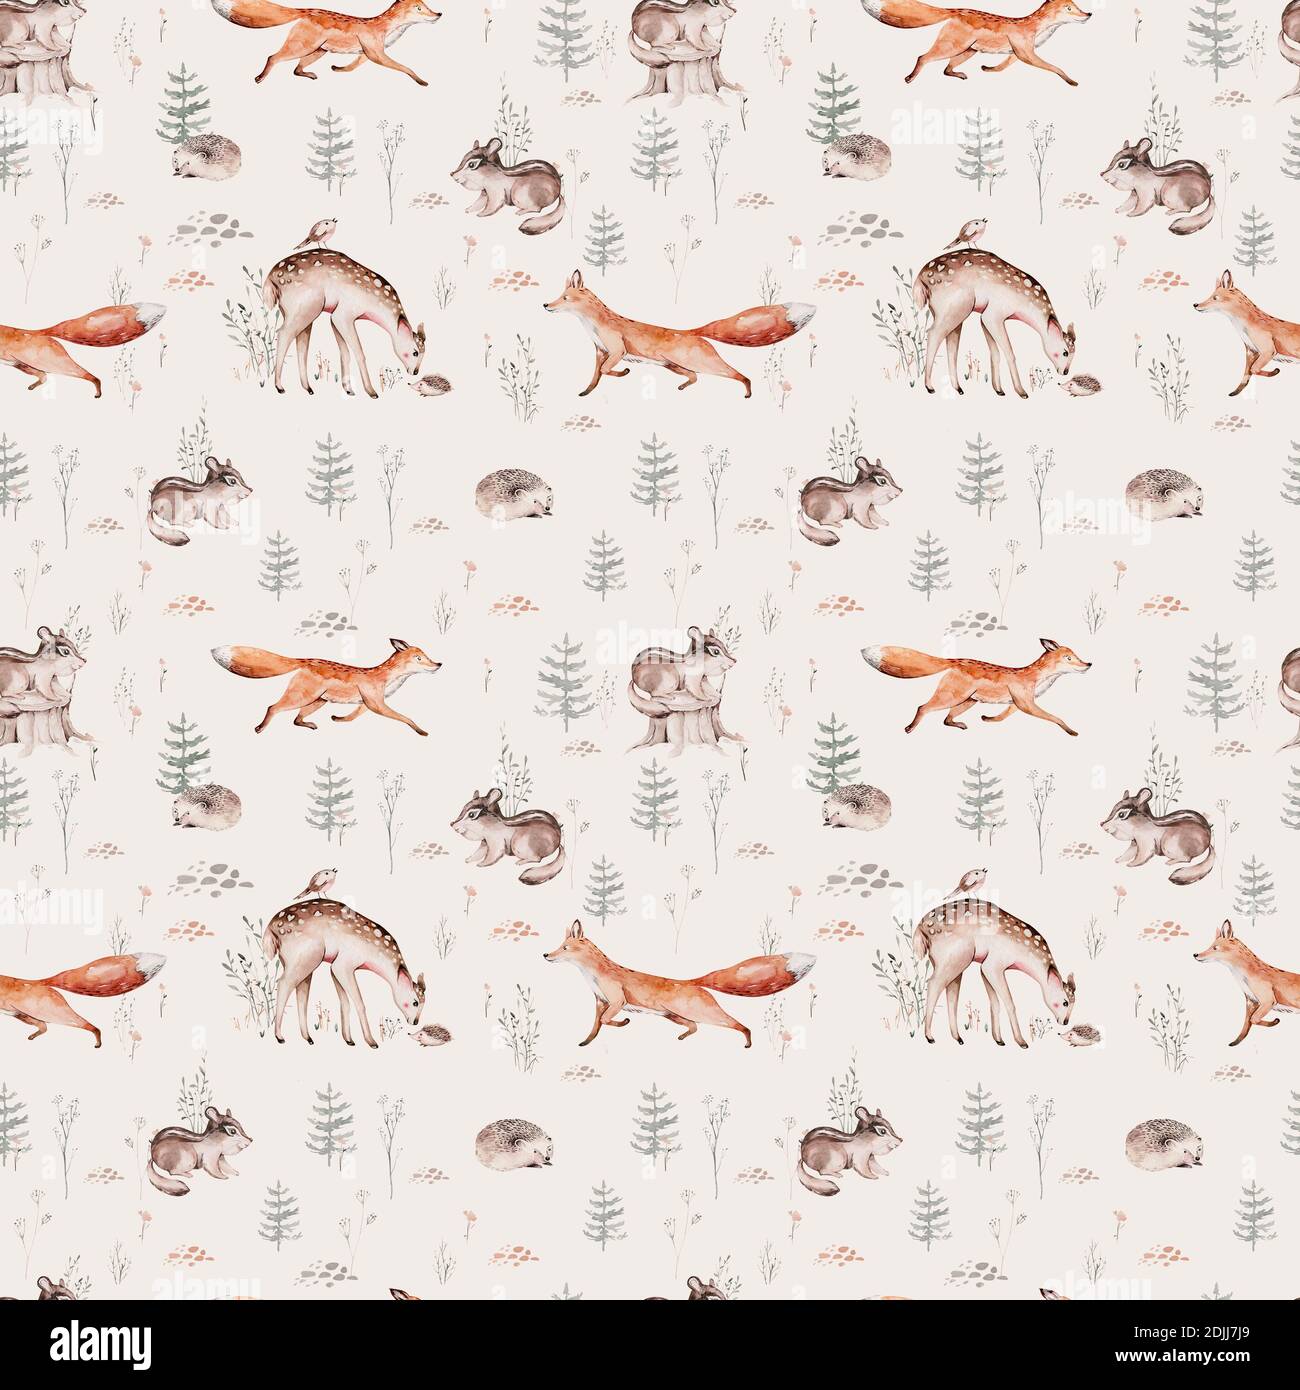 Watercolor Woodland Animal Scandinavian Seamless Pattern Fabric Wallpaper  Background with Owl Hedgehog Fox and Stock Image  Image of hare baby  204840097